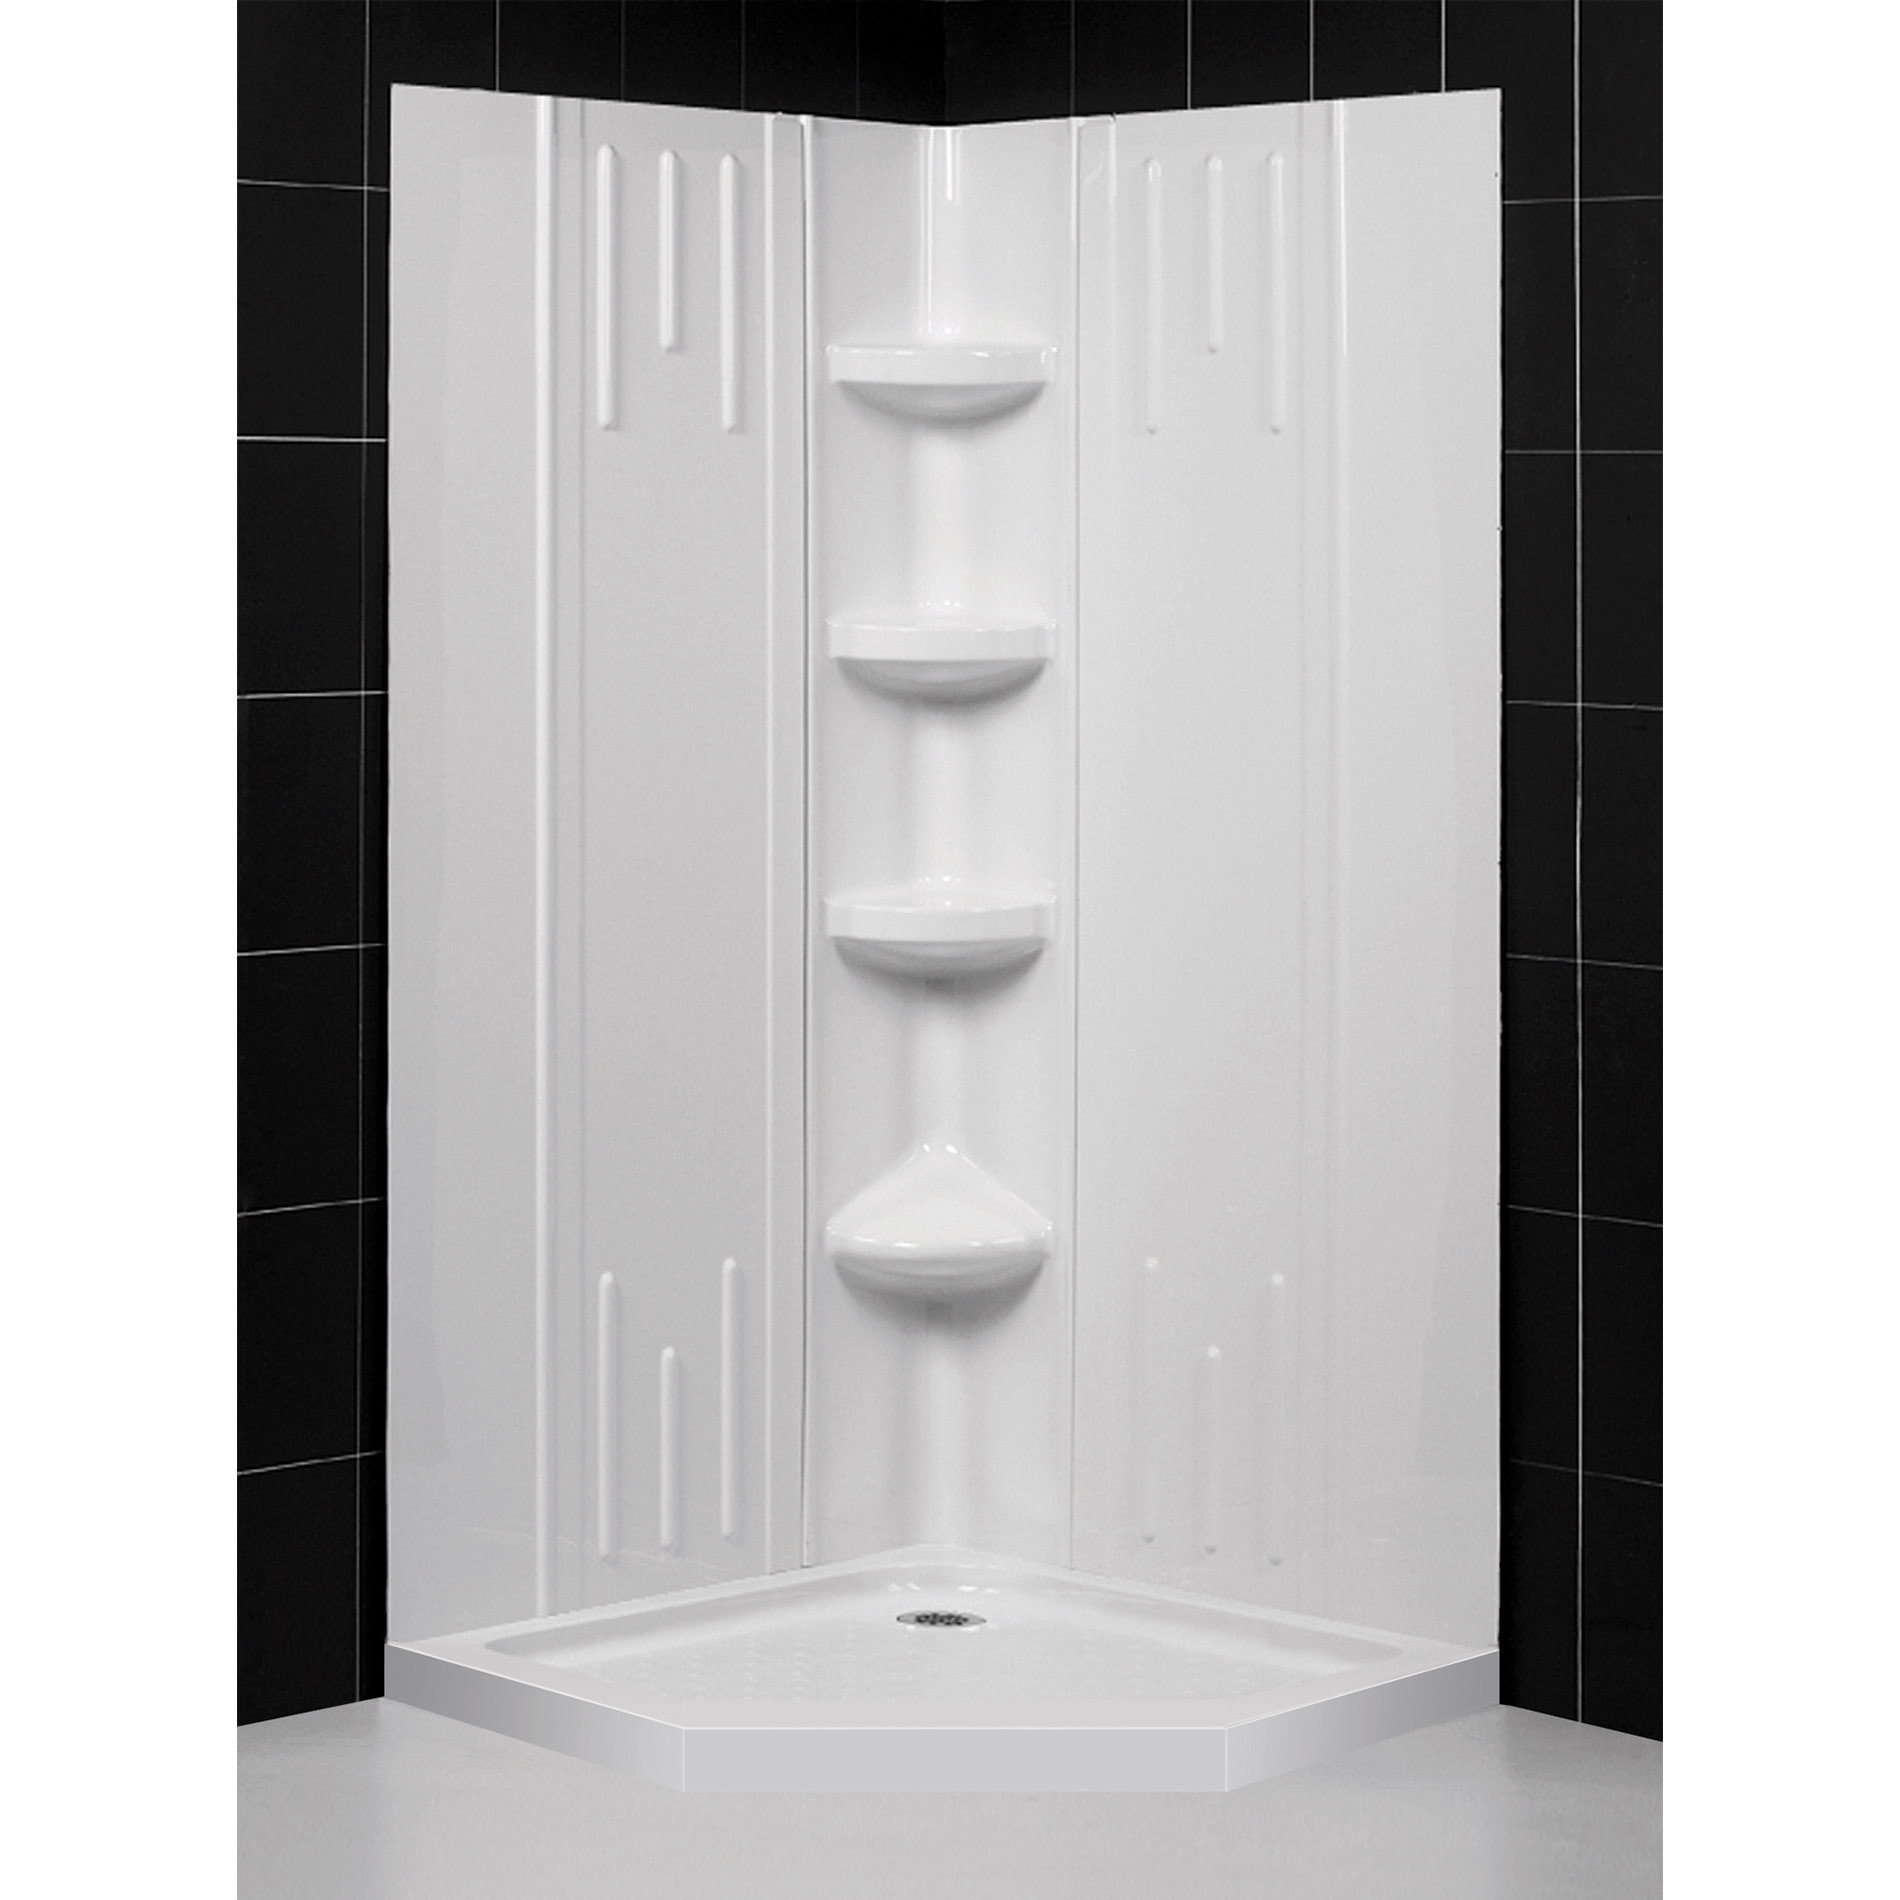 DreamLine 40 in. x 40 in. x 75 5/8 in. H Neo-Angle Shower Base and QWALL-2 Acrylic Corner Backwall Kit in White